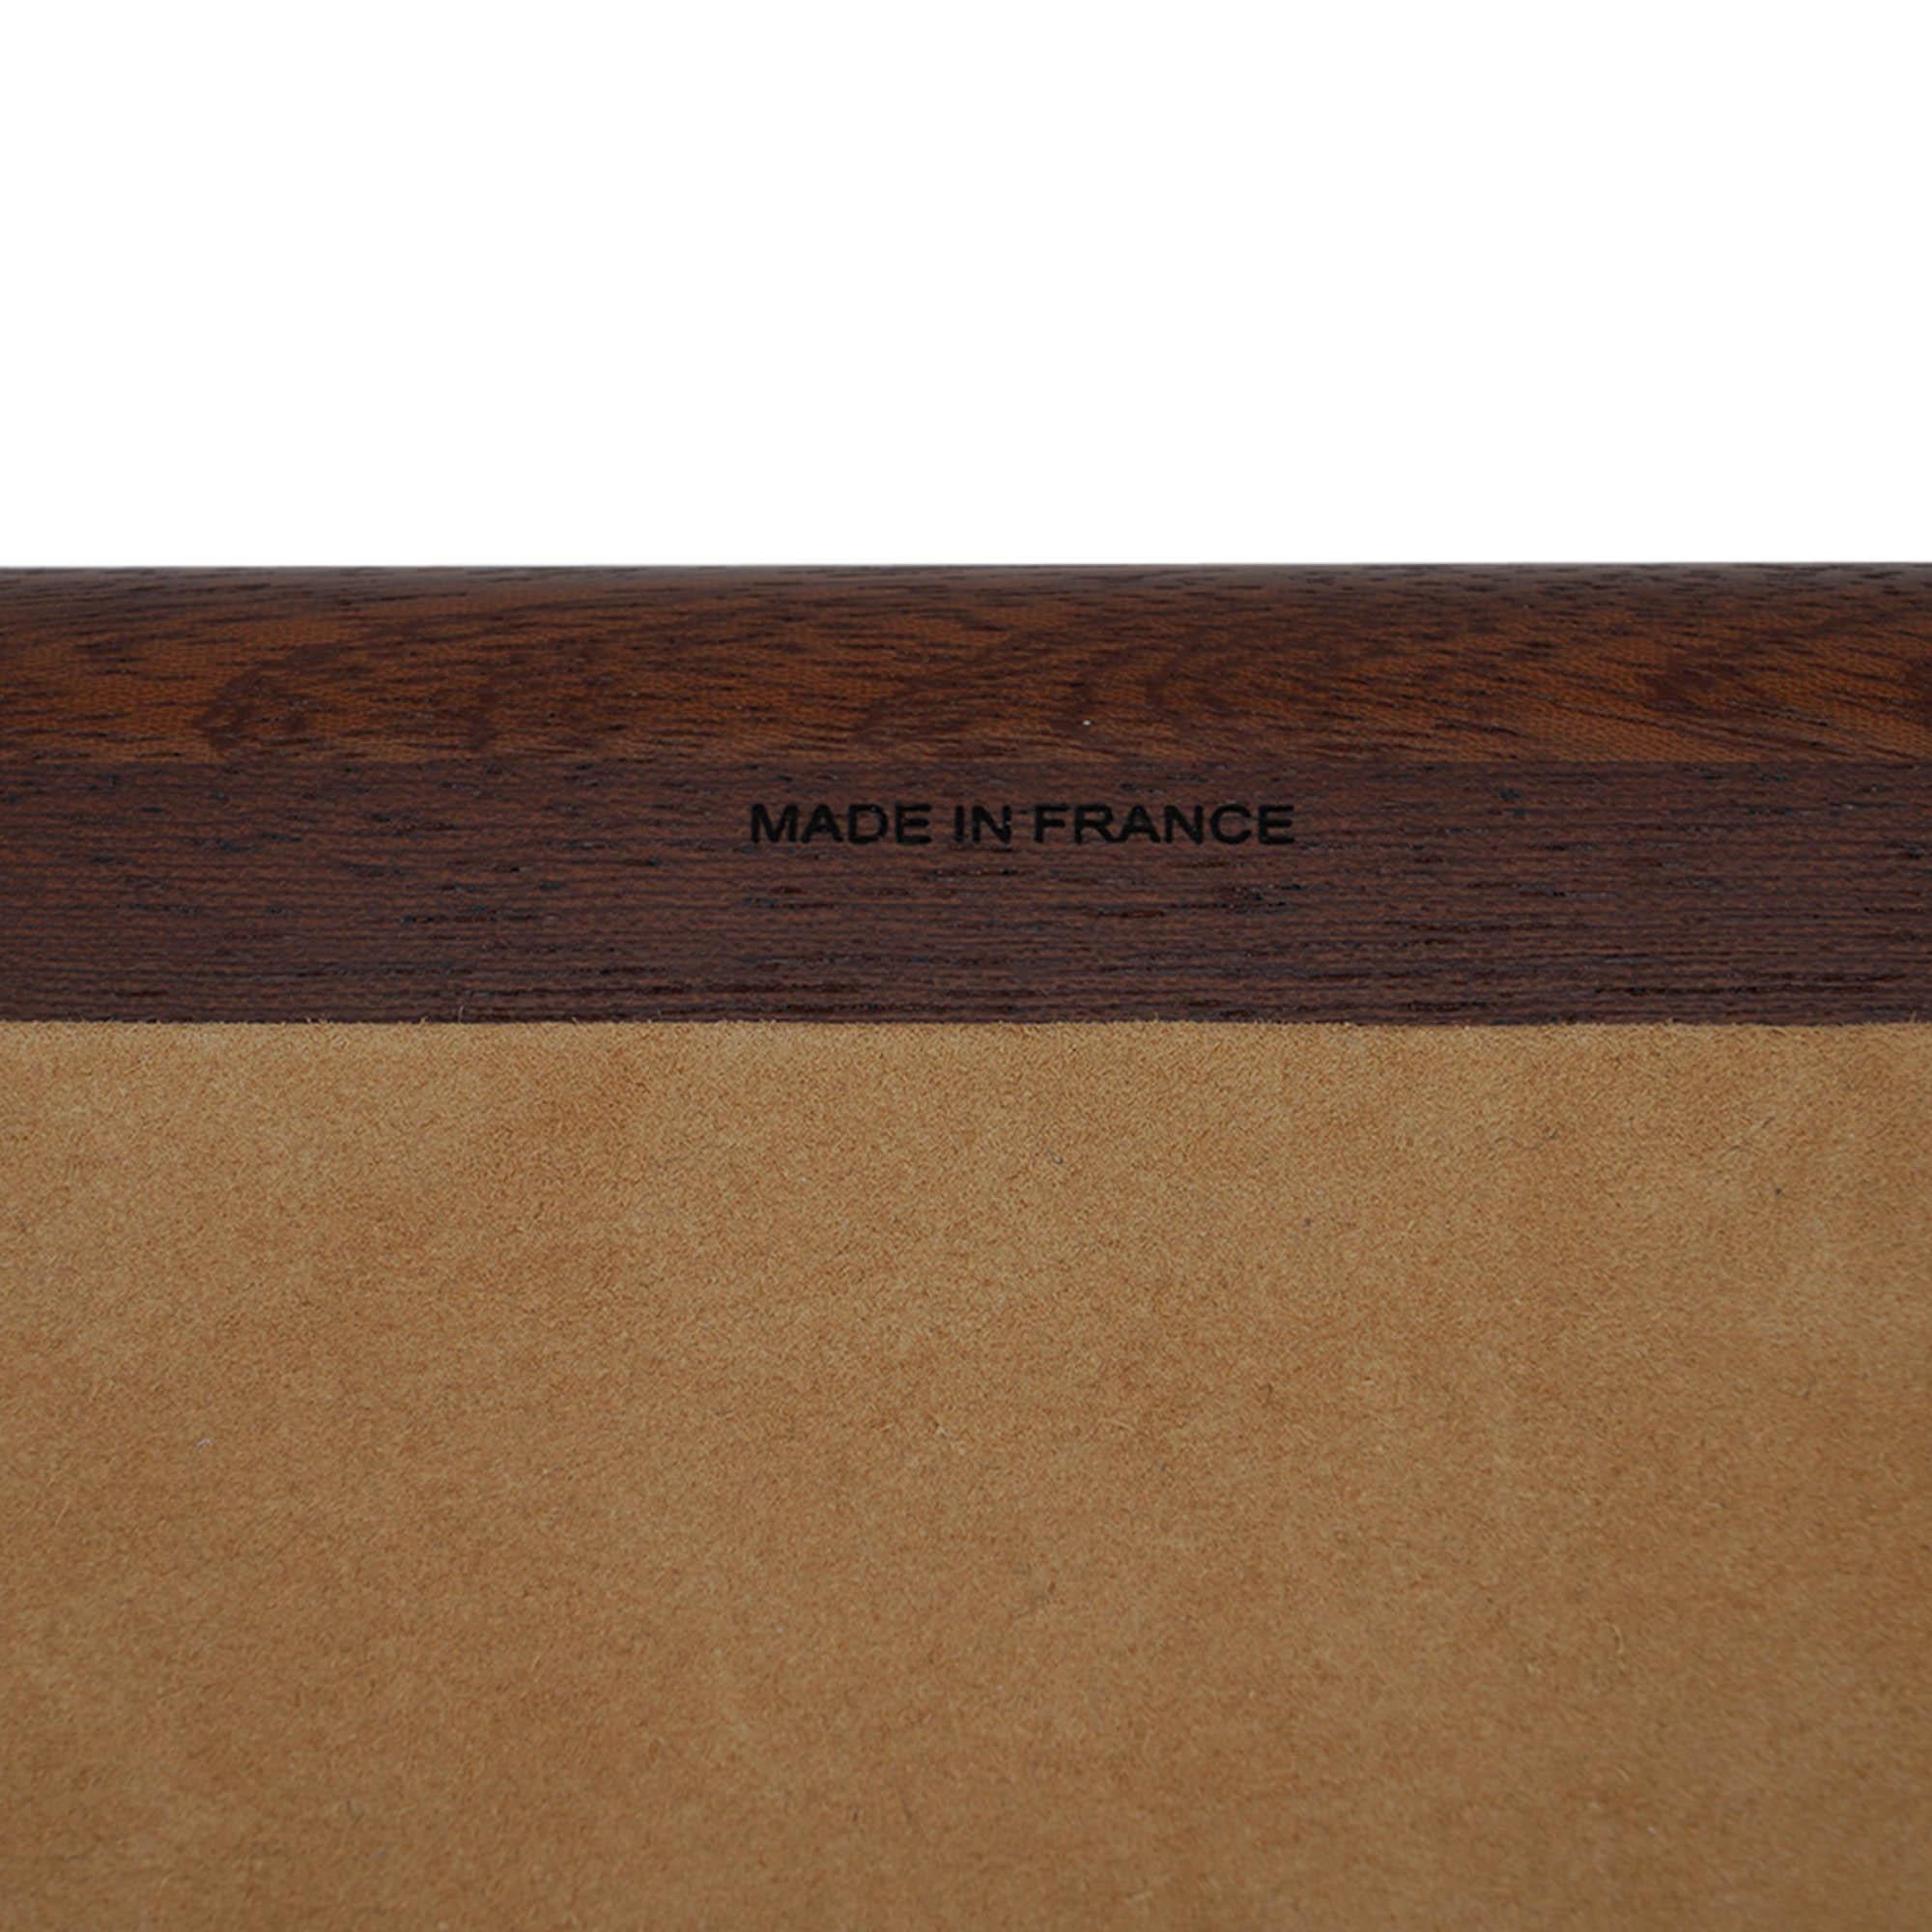 Hermes Coffret a Cigares Humidor Limited Edition Sycamore Holz Sesam Eidechse im Angebot 16